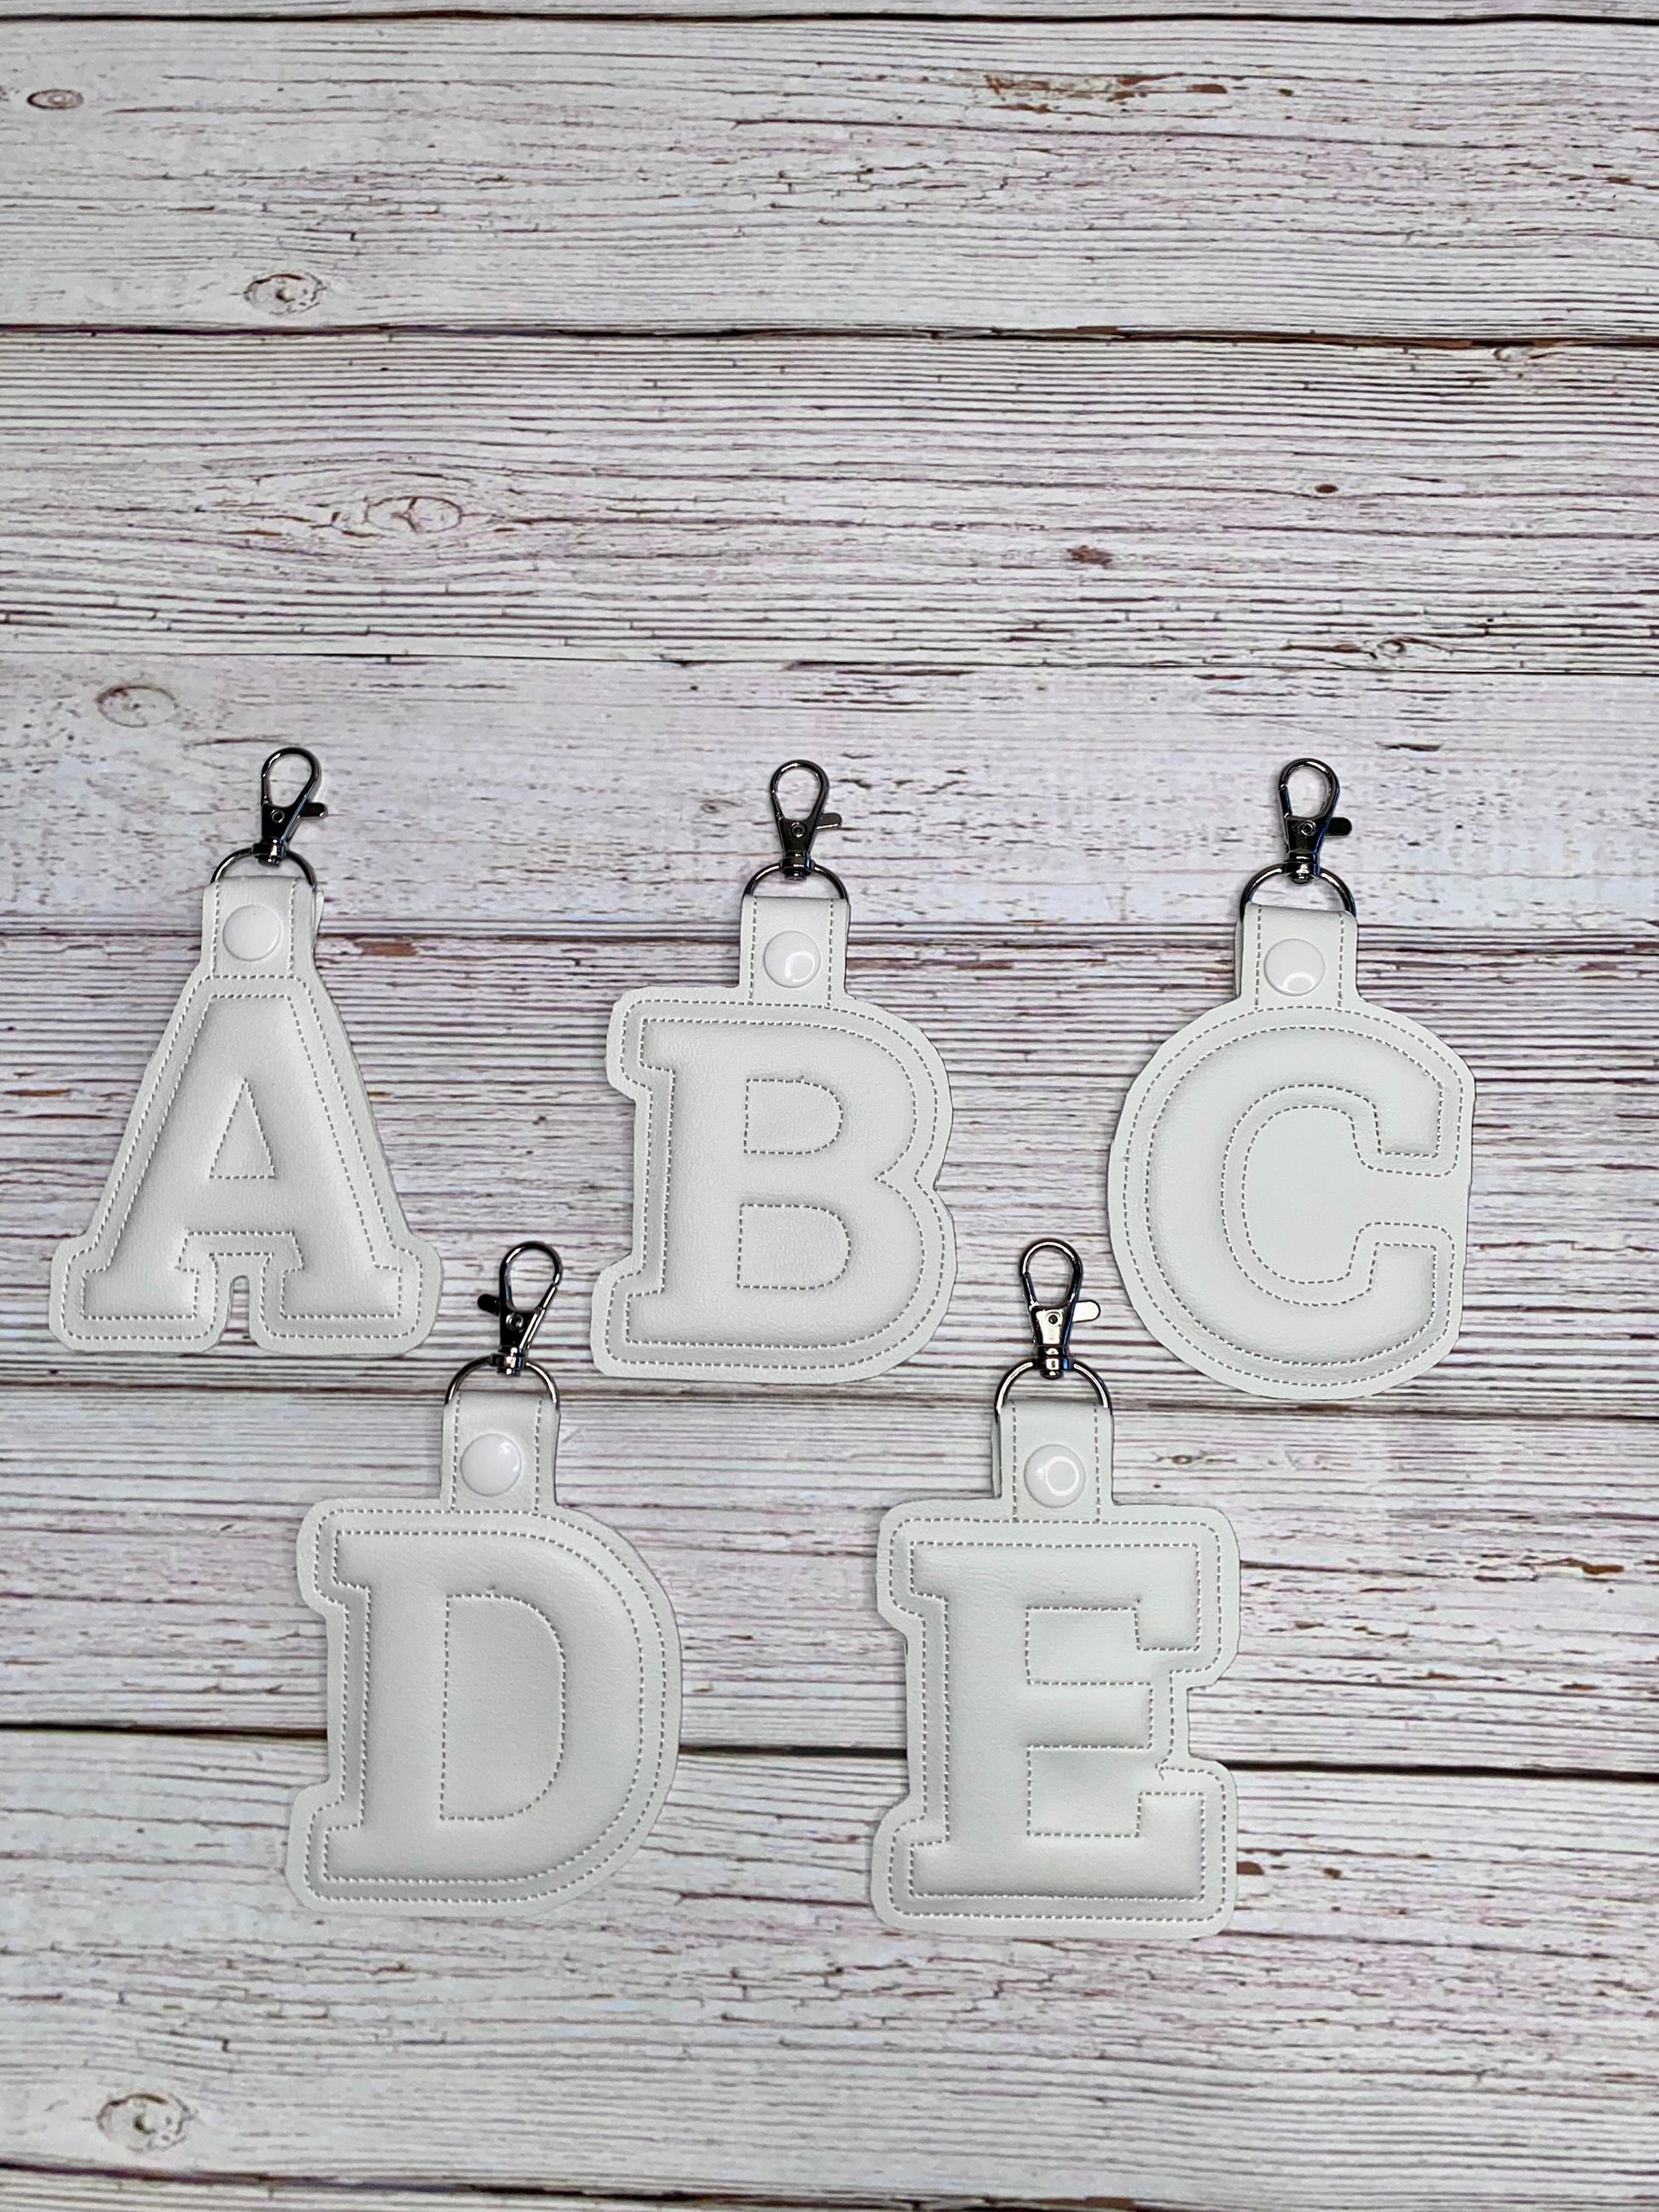 Faux Leather Puff Block Font Key Chains, Varsity Letters for Keychains, Monogram Keychains, Initial Key Fobs, Customized Key Ring,